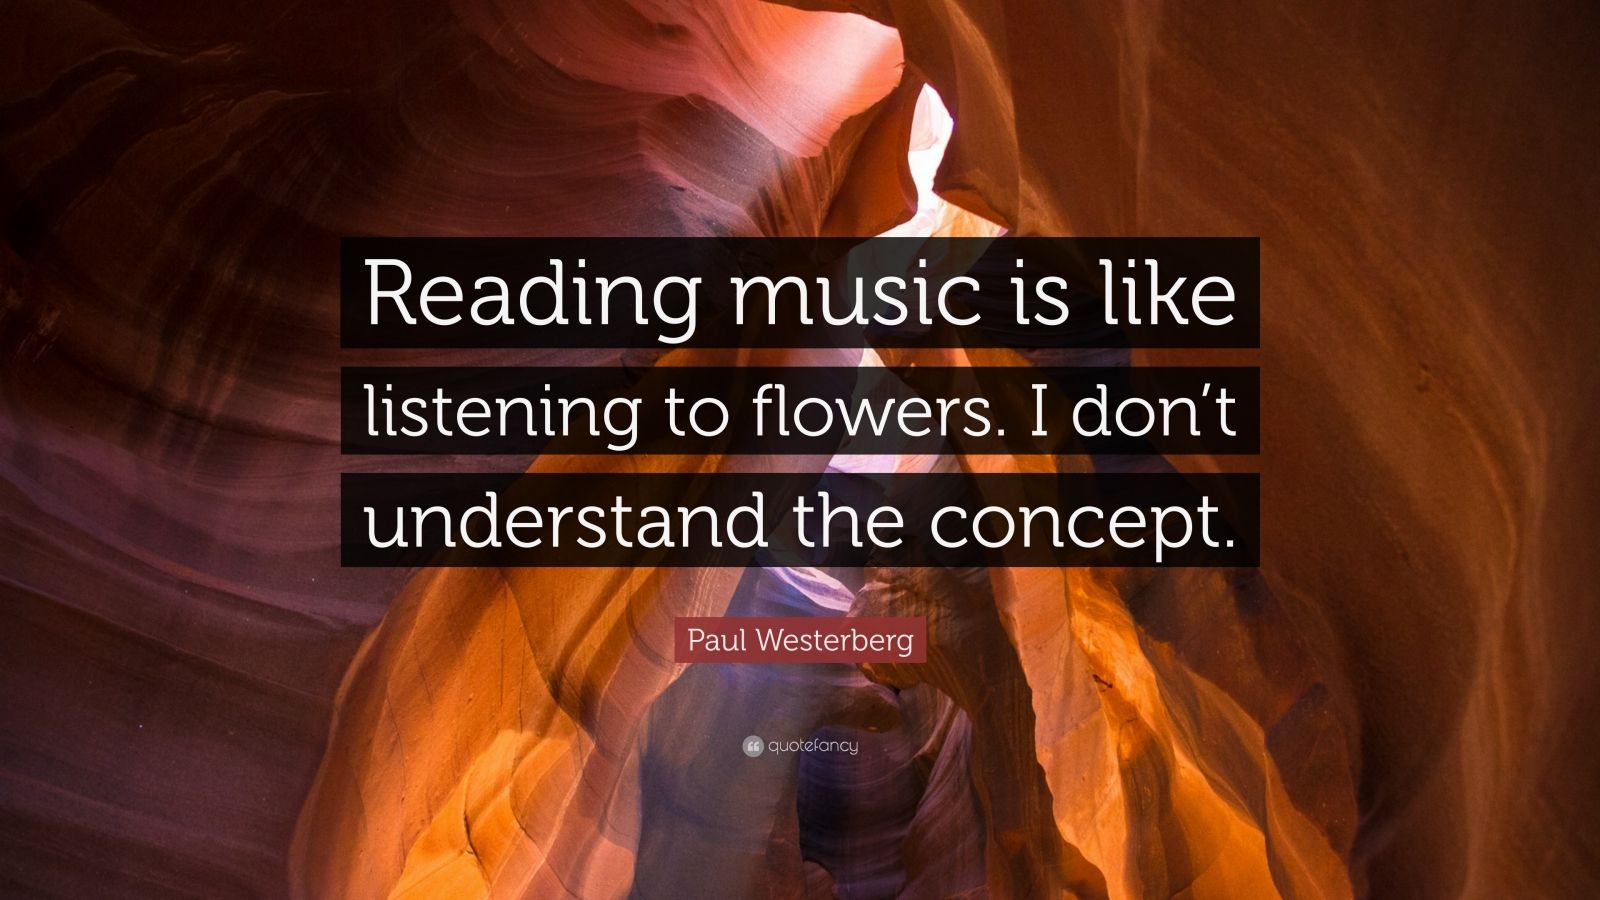 Paul Westerberg Quote: “Reading music is like listening to flowers. I ...